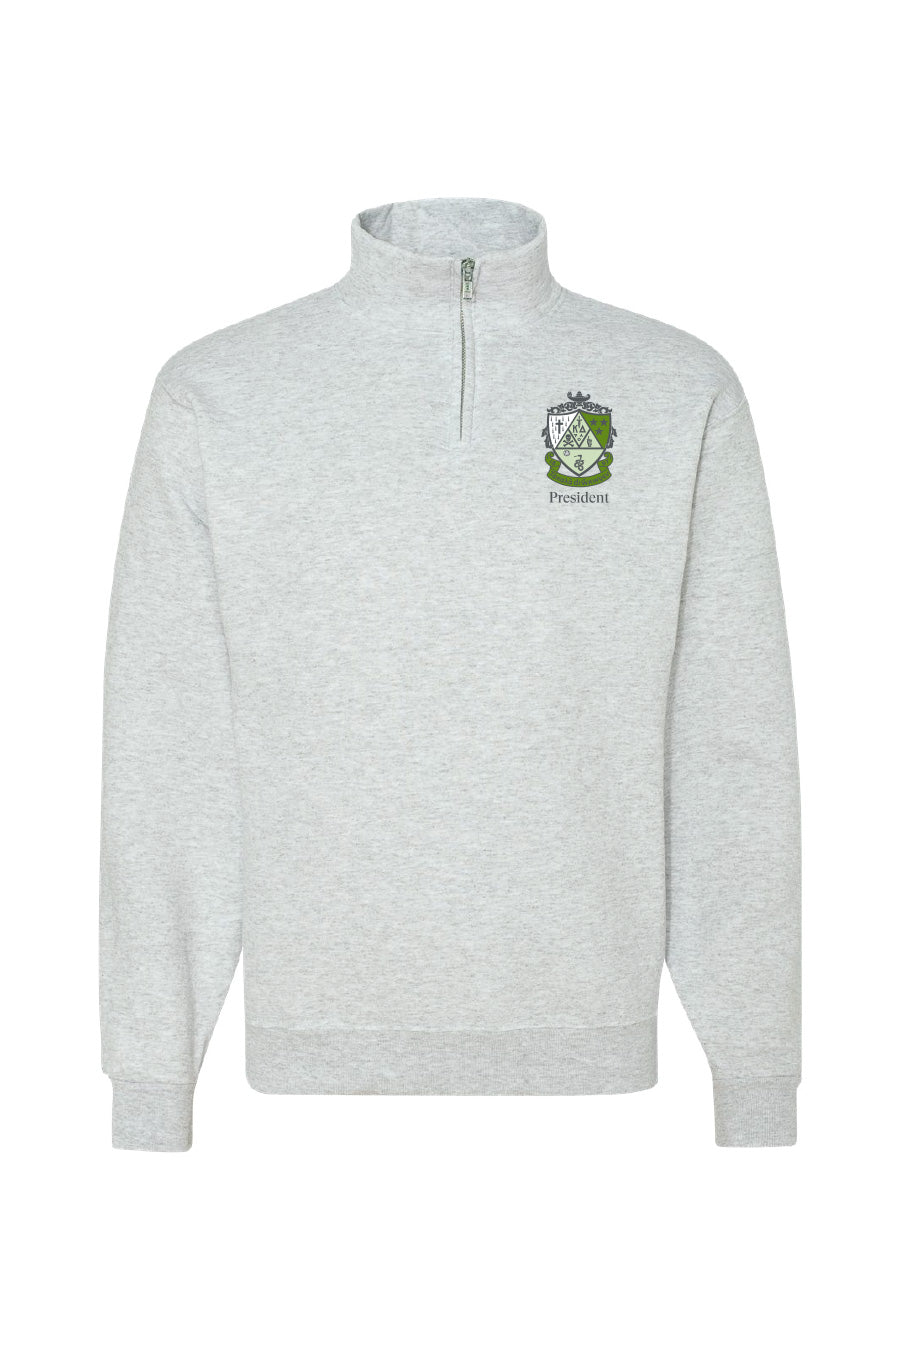 Ally Governing Council 1/4 Zip